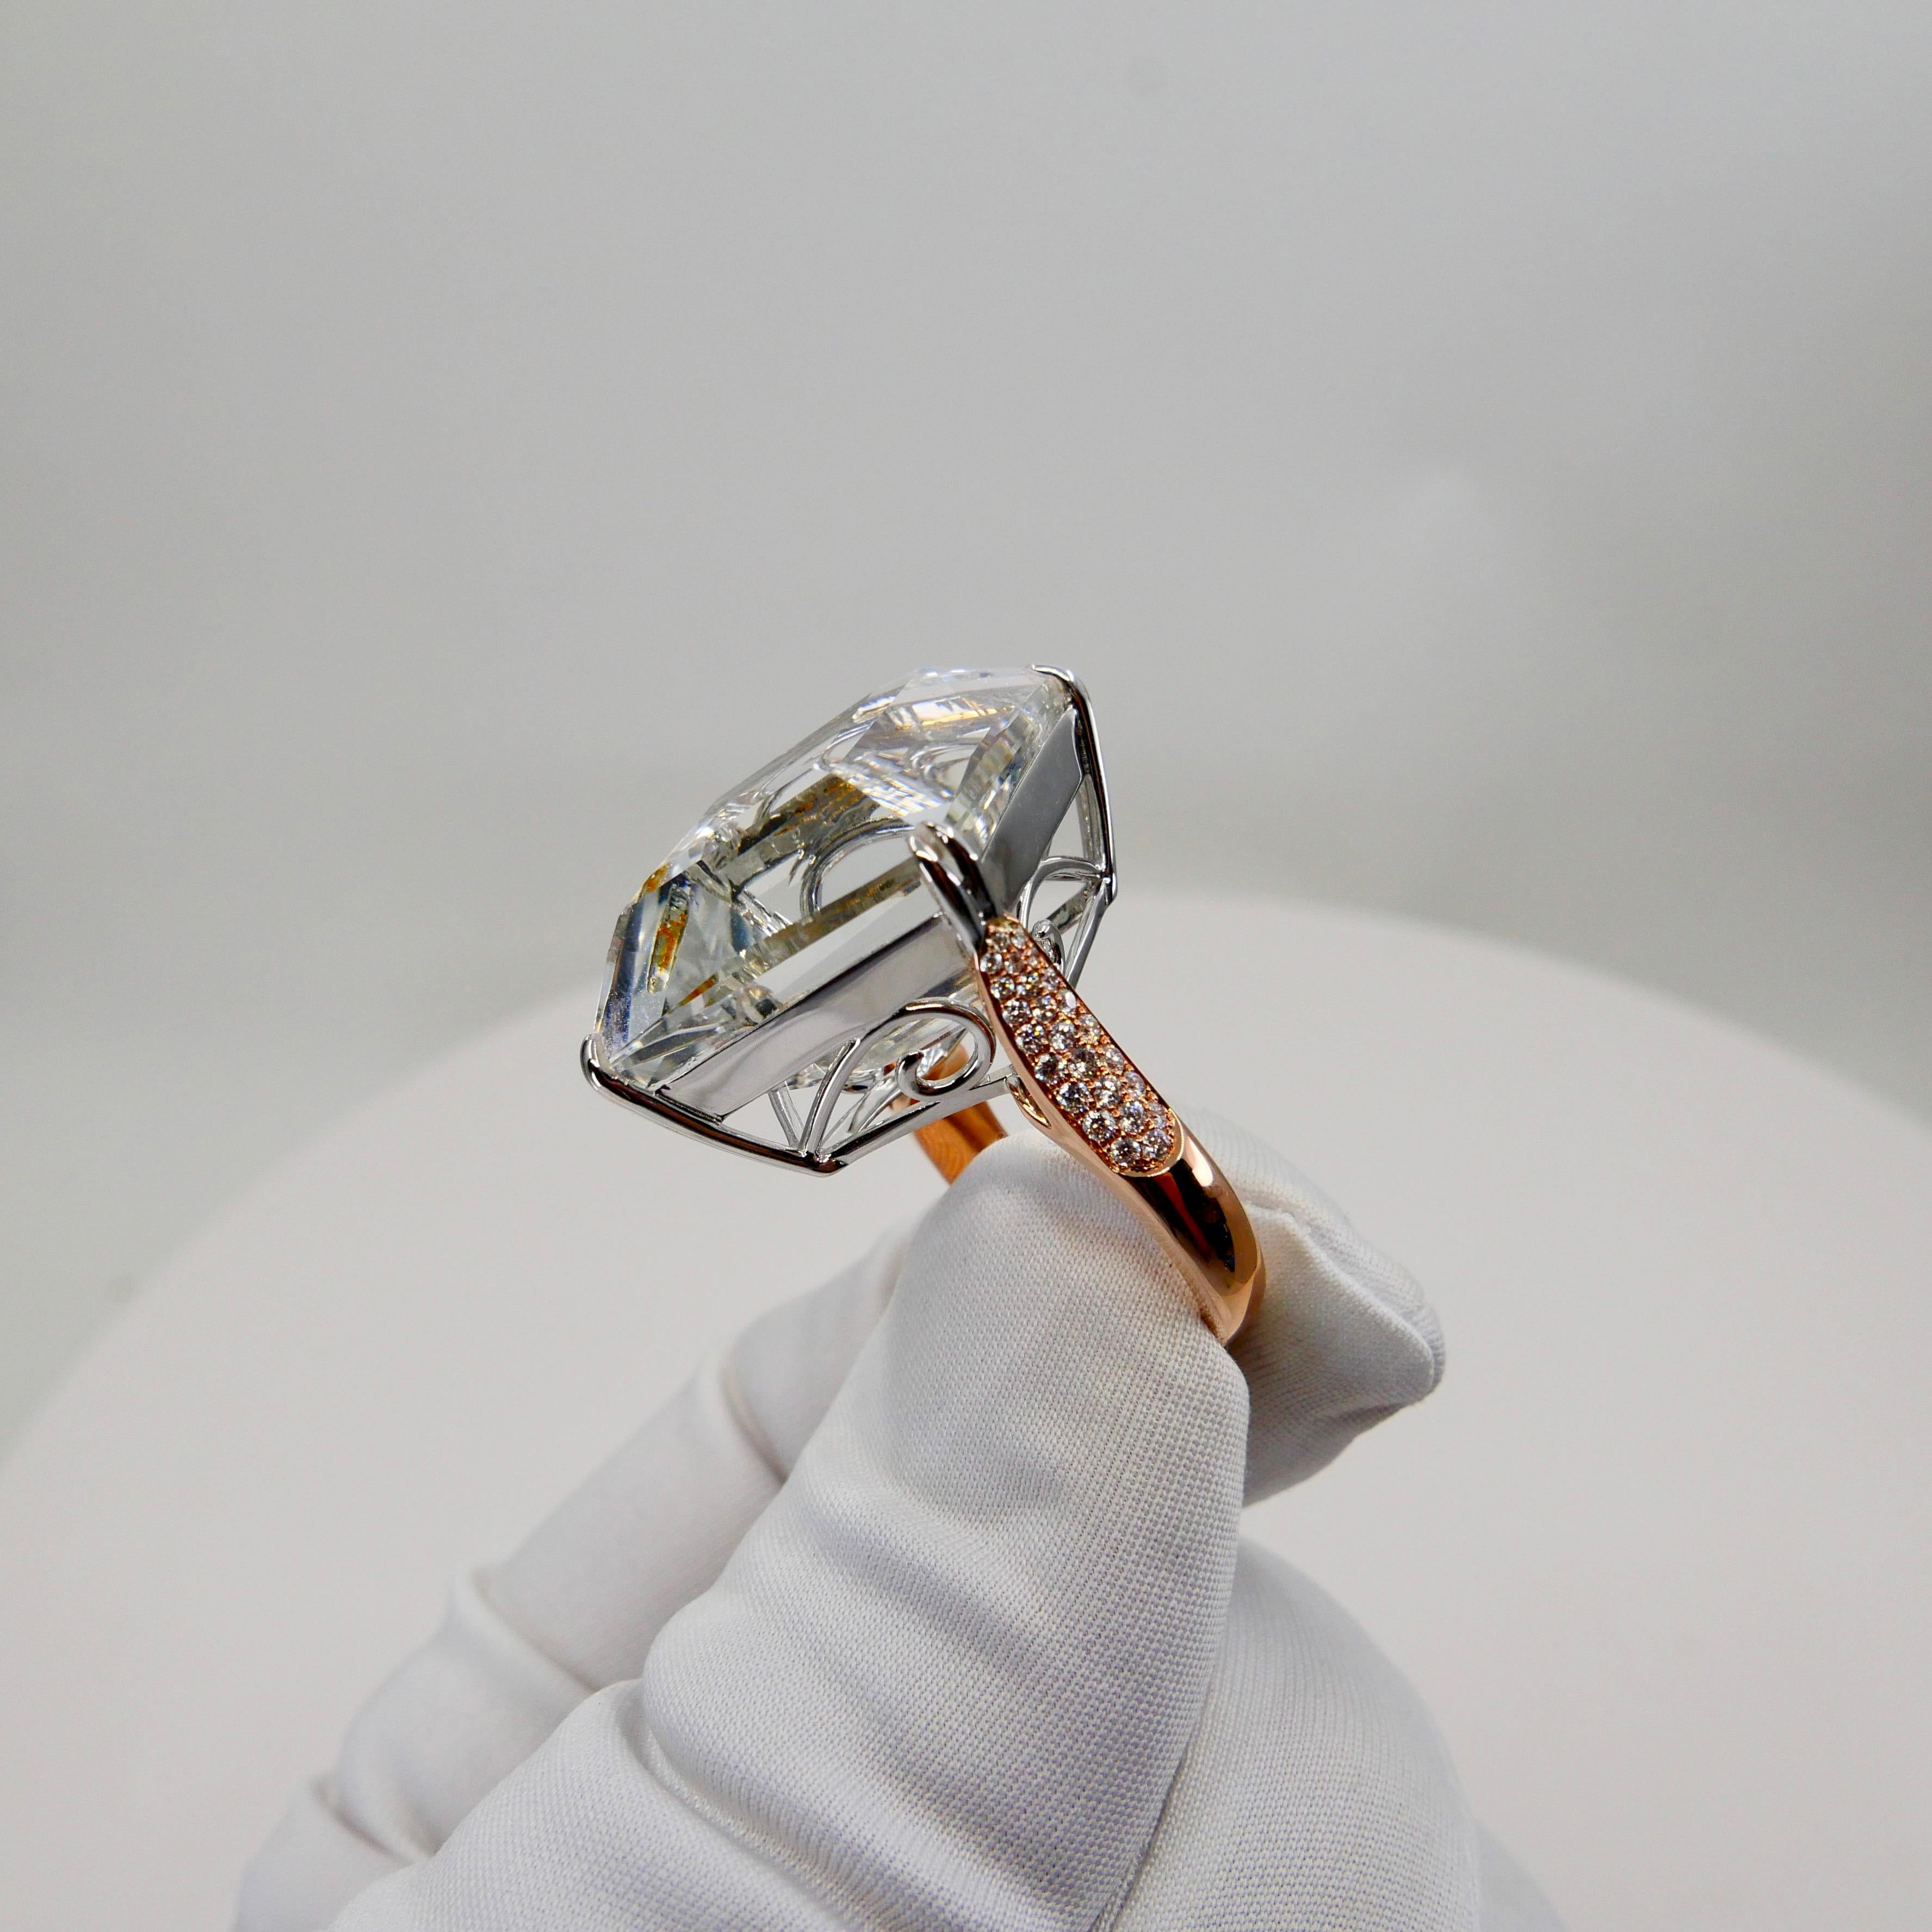 49.02 Carat Kite Step Cut White Topaz and Diamond Cocktail Ring, Massive For Sale 3